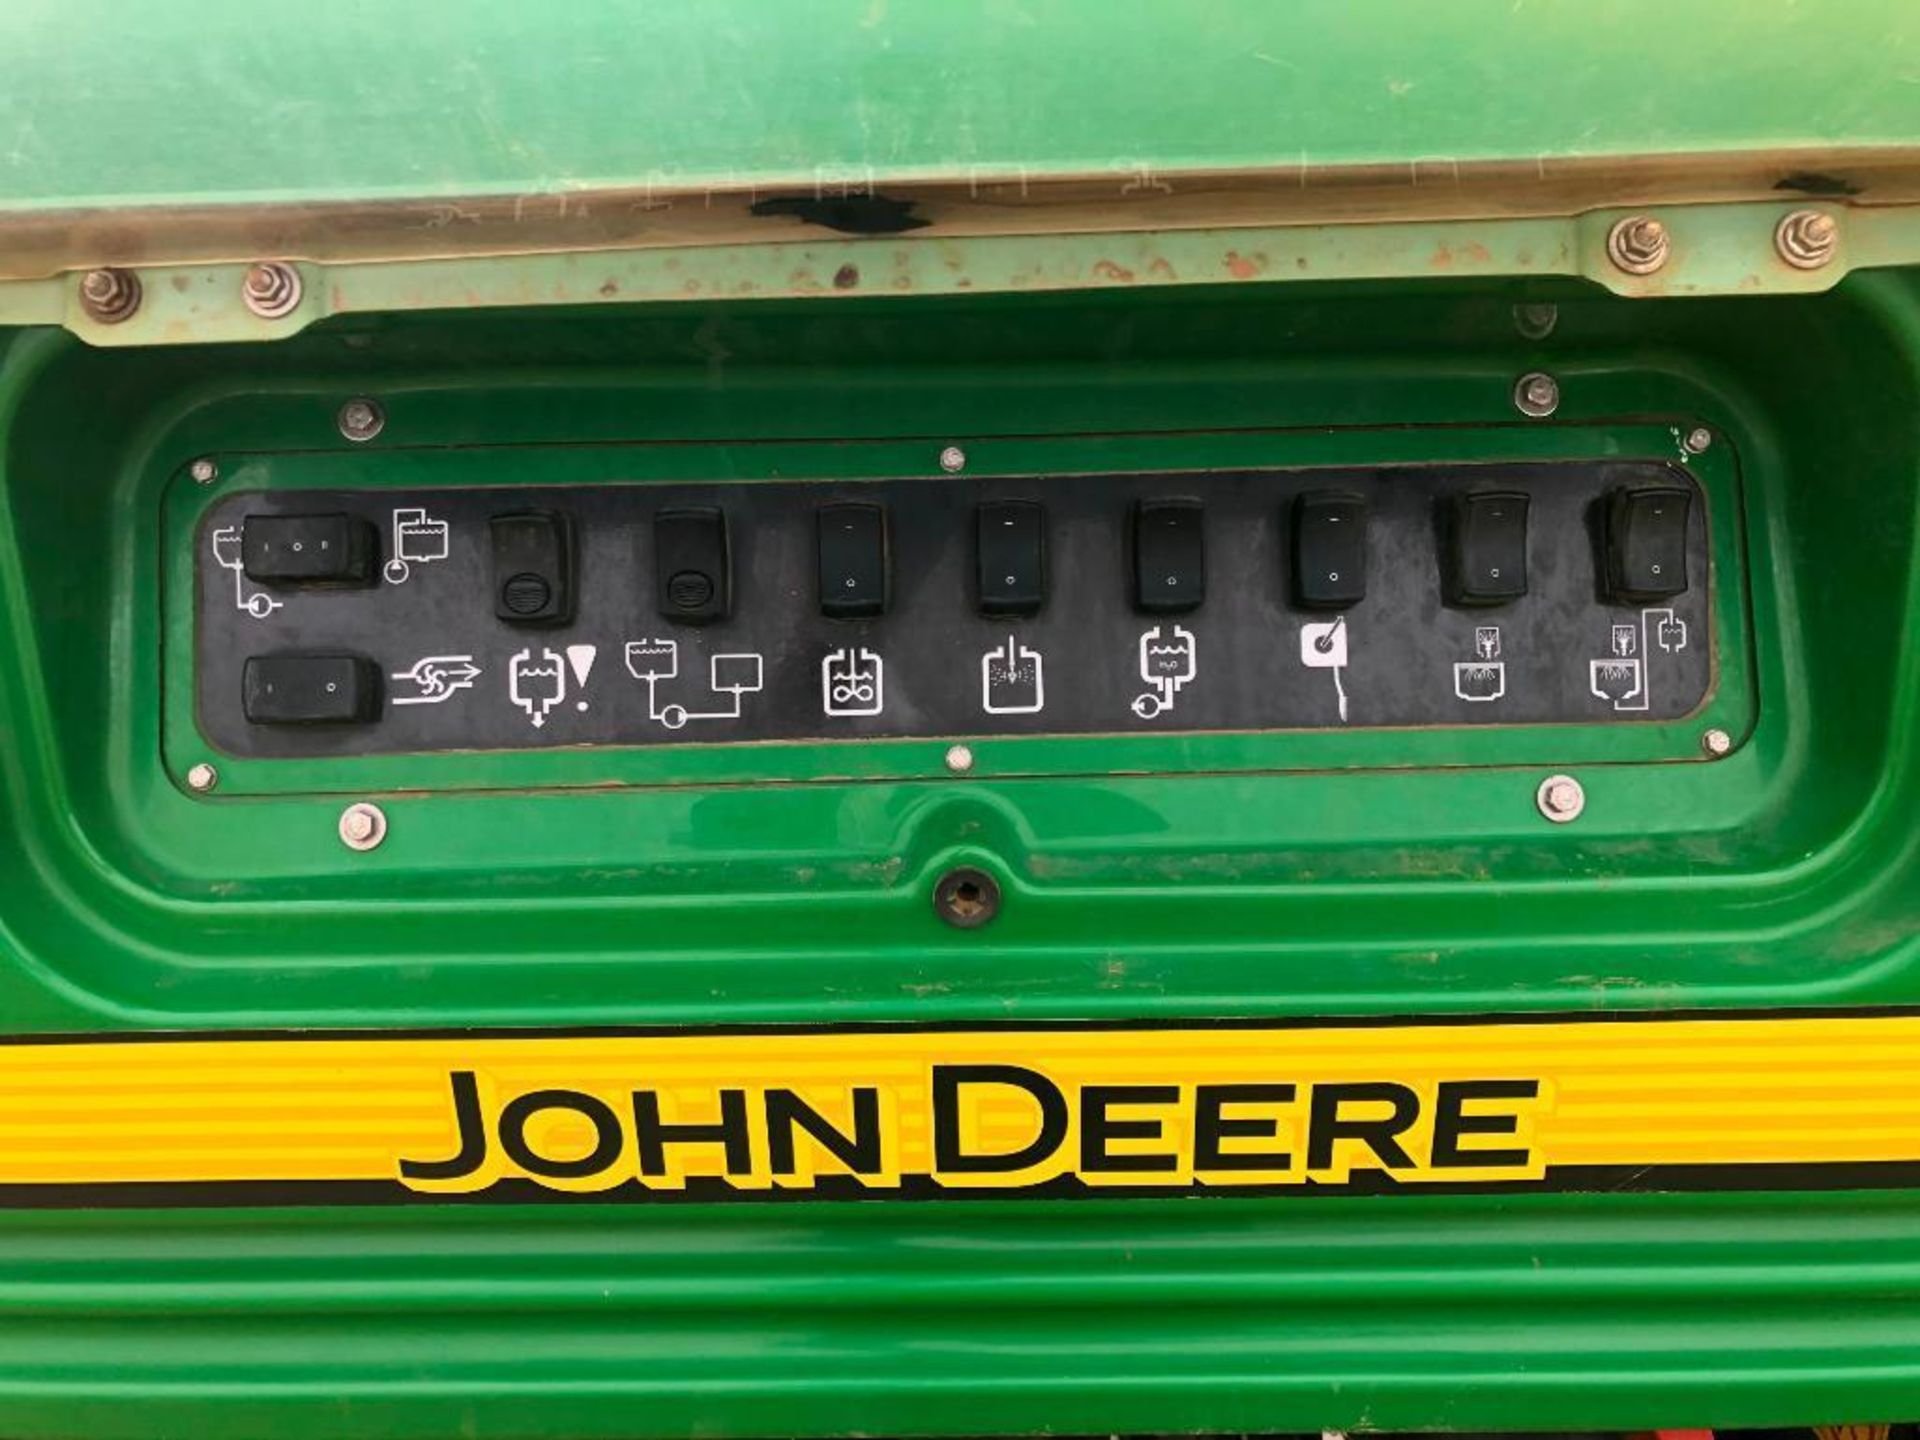 2012 John Deere R962i 36m trailed sprayer, 6200l tank, auto-height control, sectional control, 3" fi - Image 8 of 9